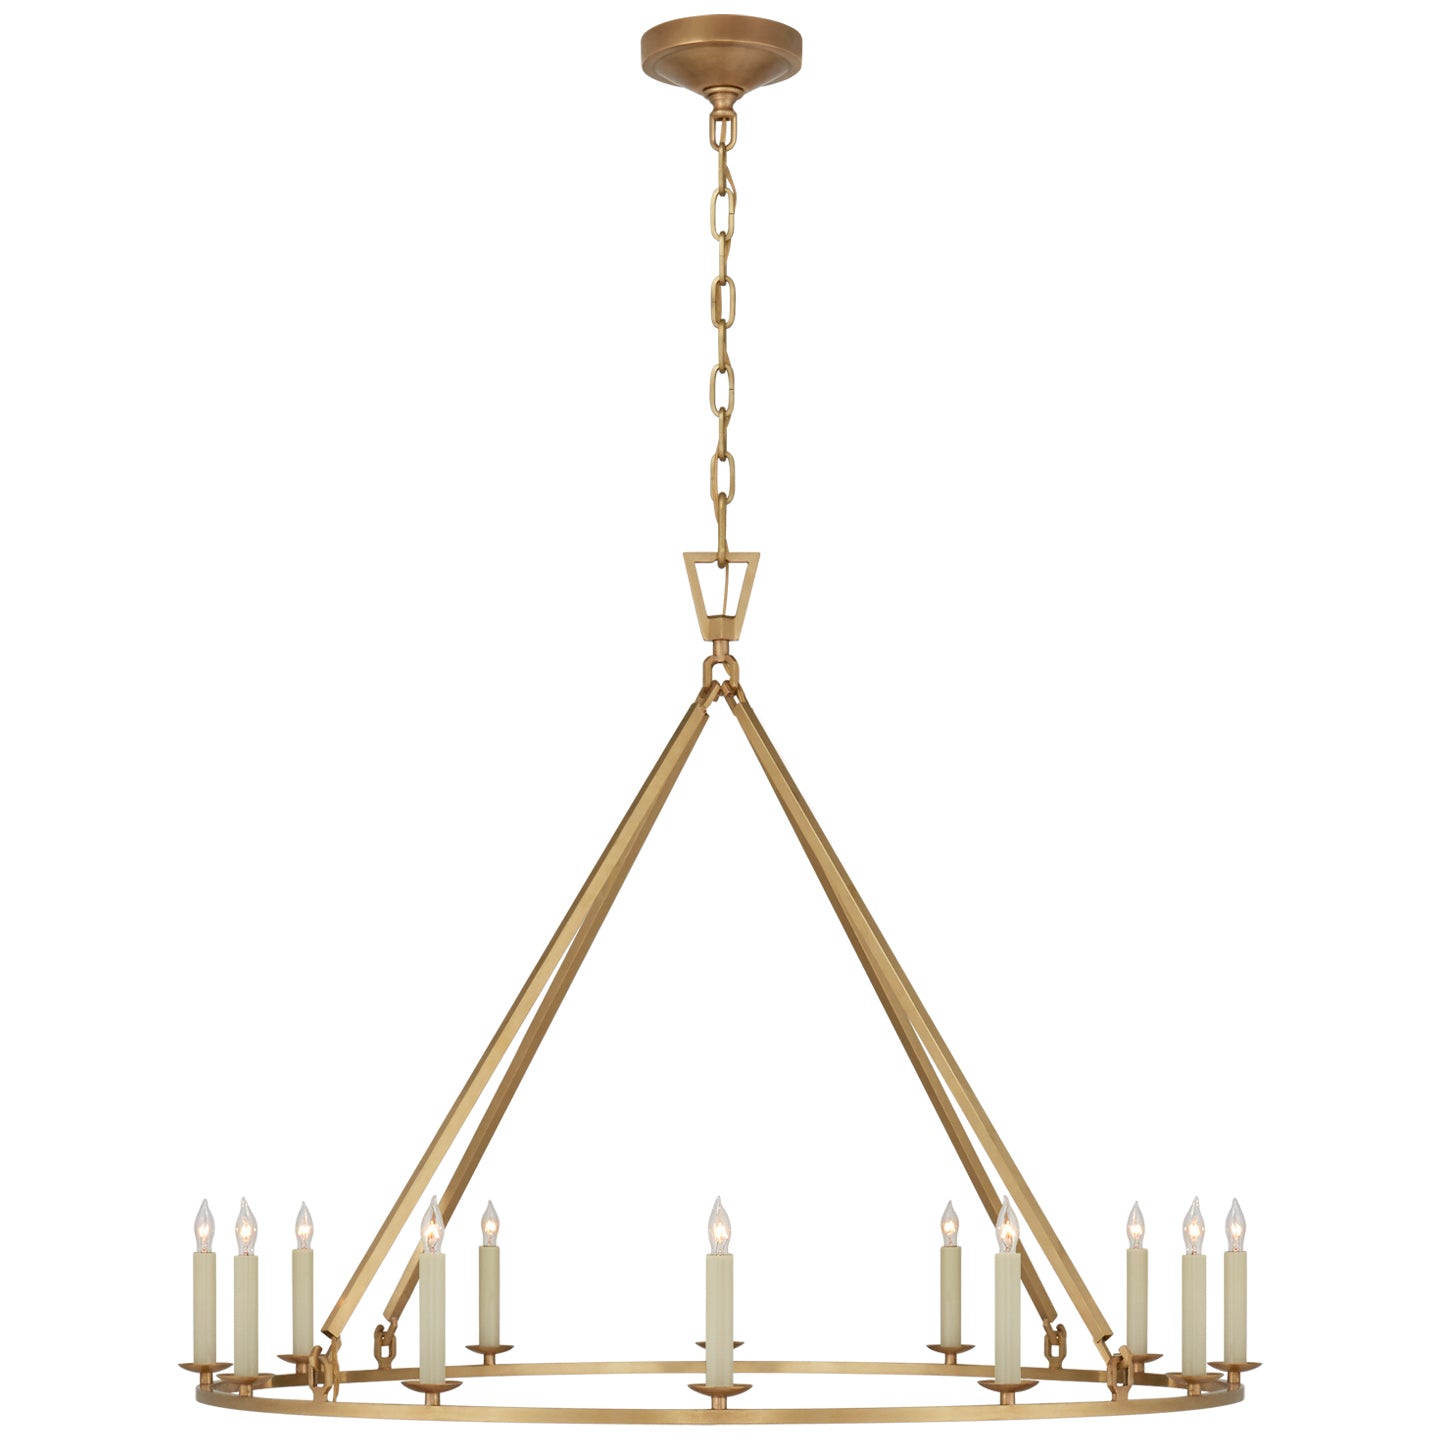 Visual Comfort Signature - CHC 5174AB - 12 Light Chandelier - Darlana Ring - Antique-Burnished Brass